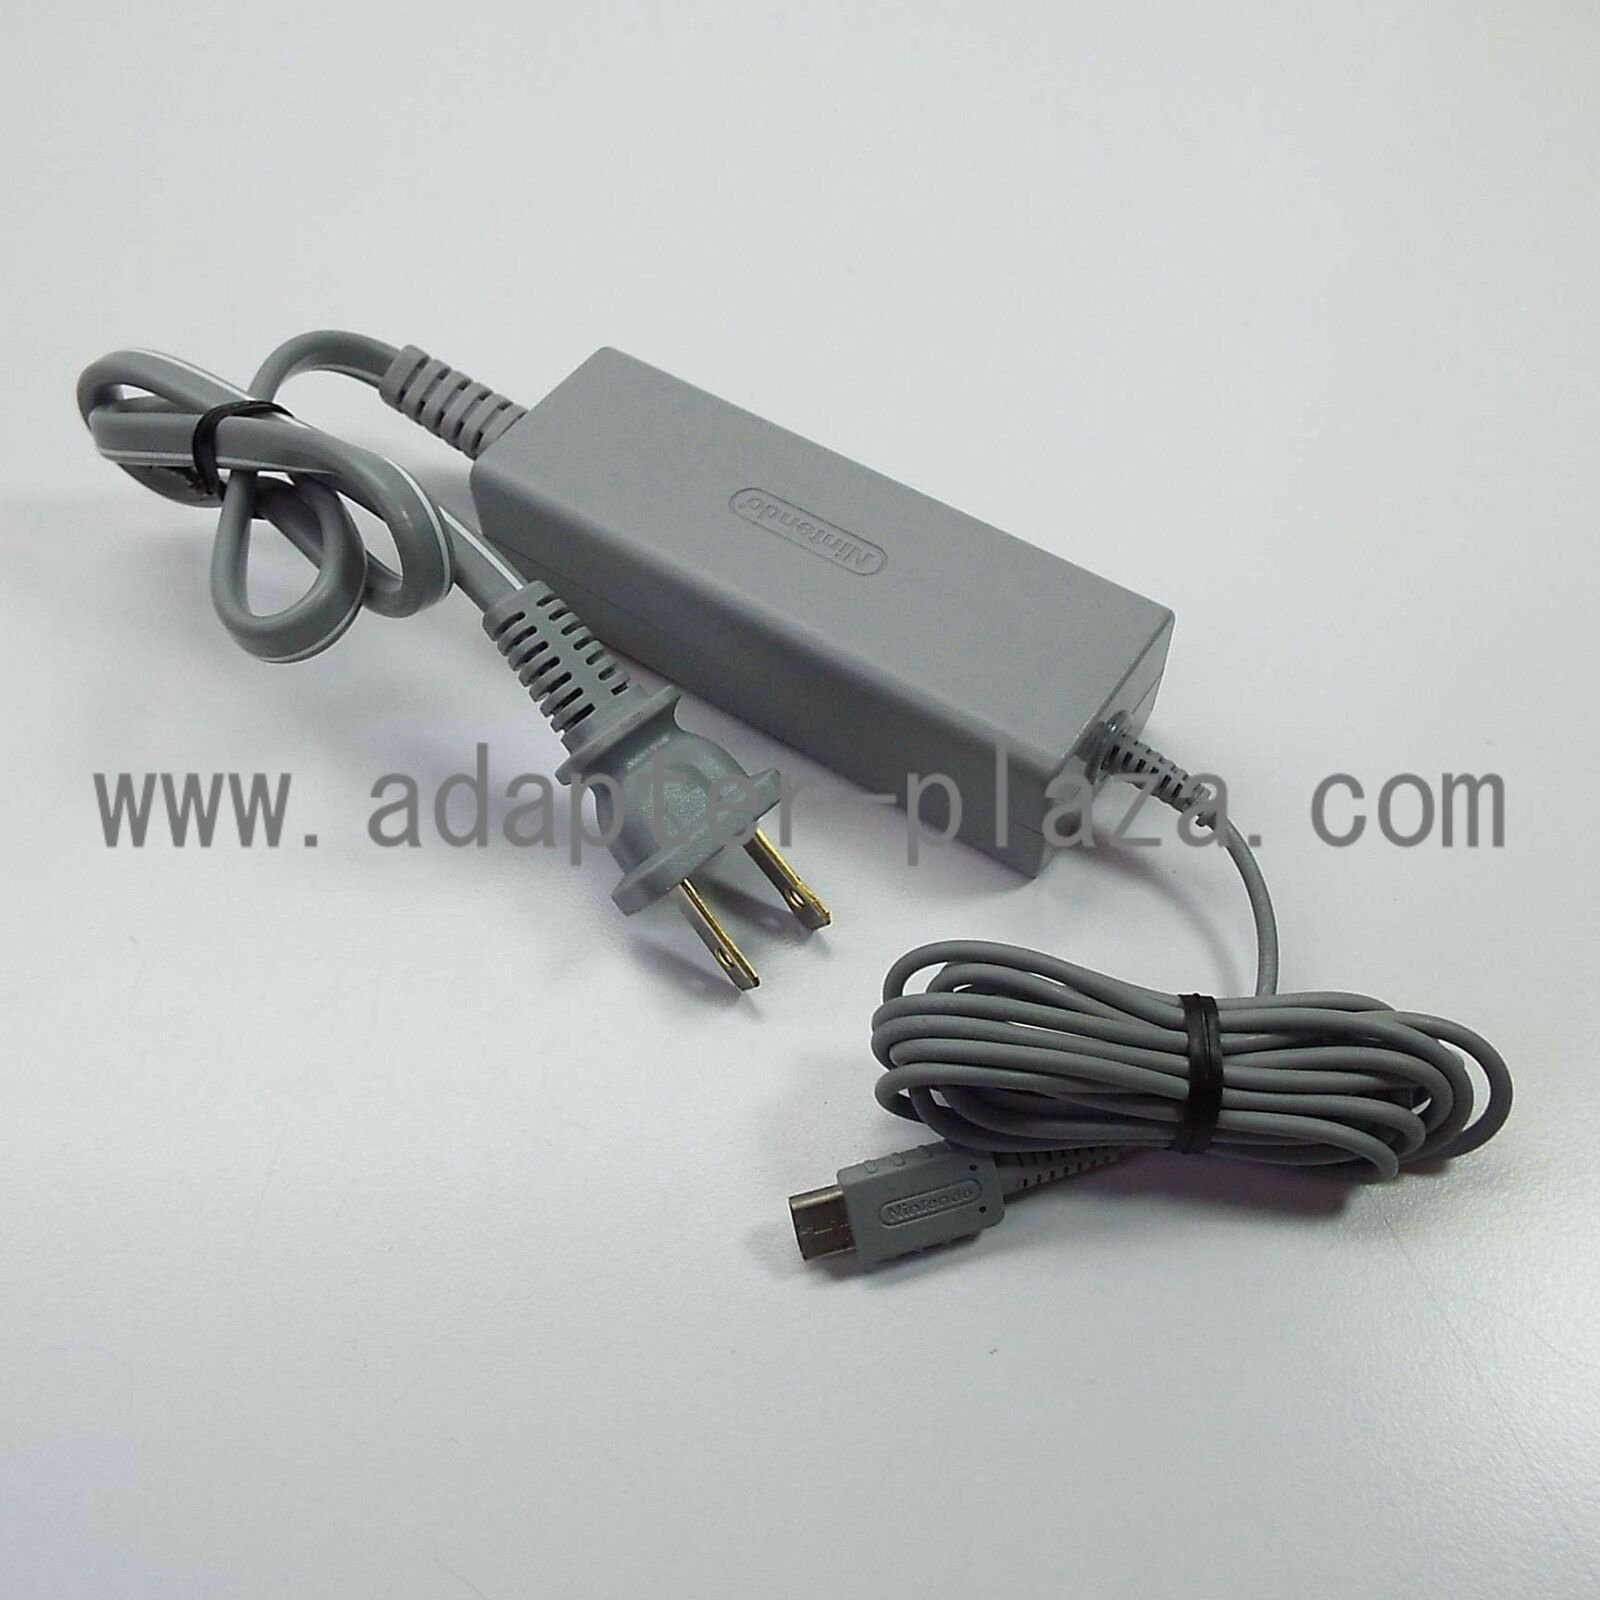 *Brand NEW* WUP-011 4.75V 1.6A AC DC Adapter POWER SUPPLY